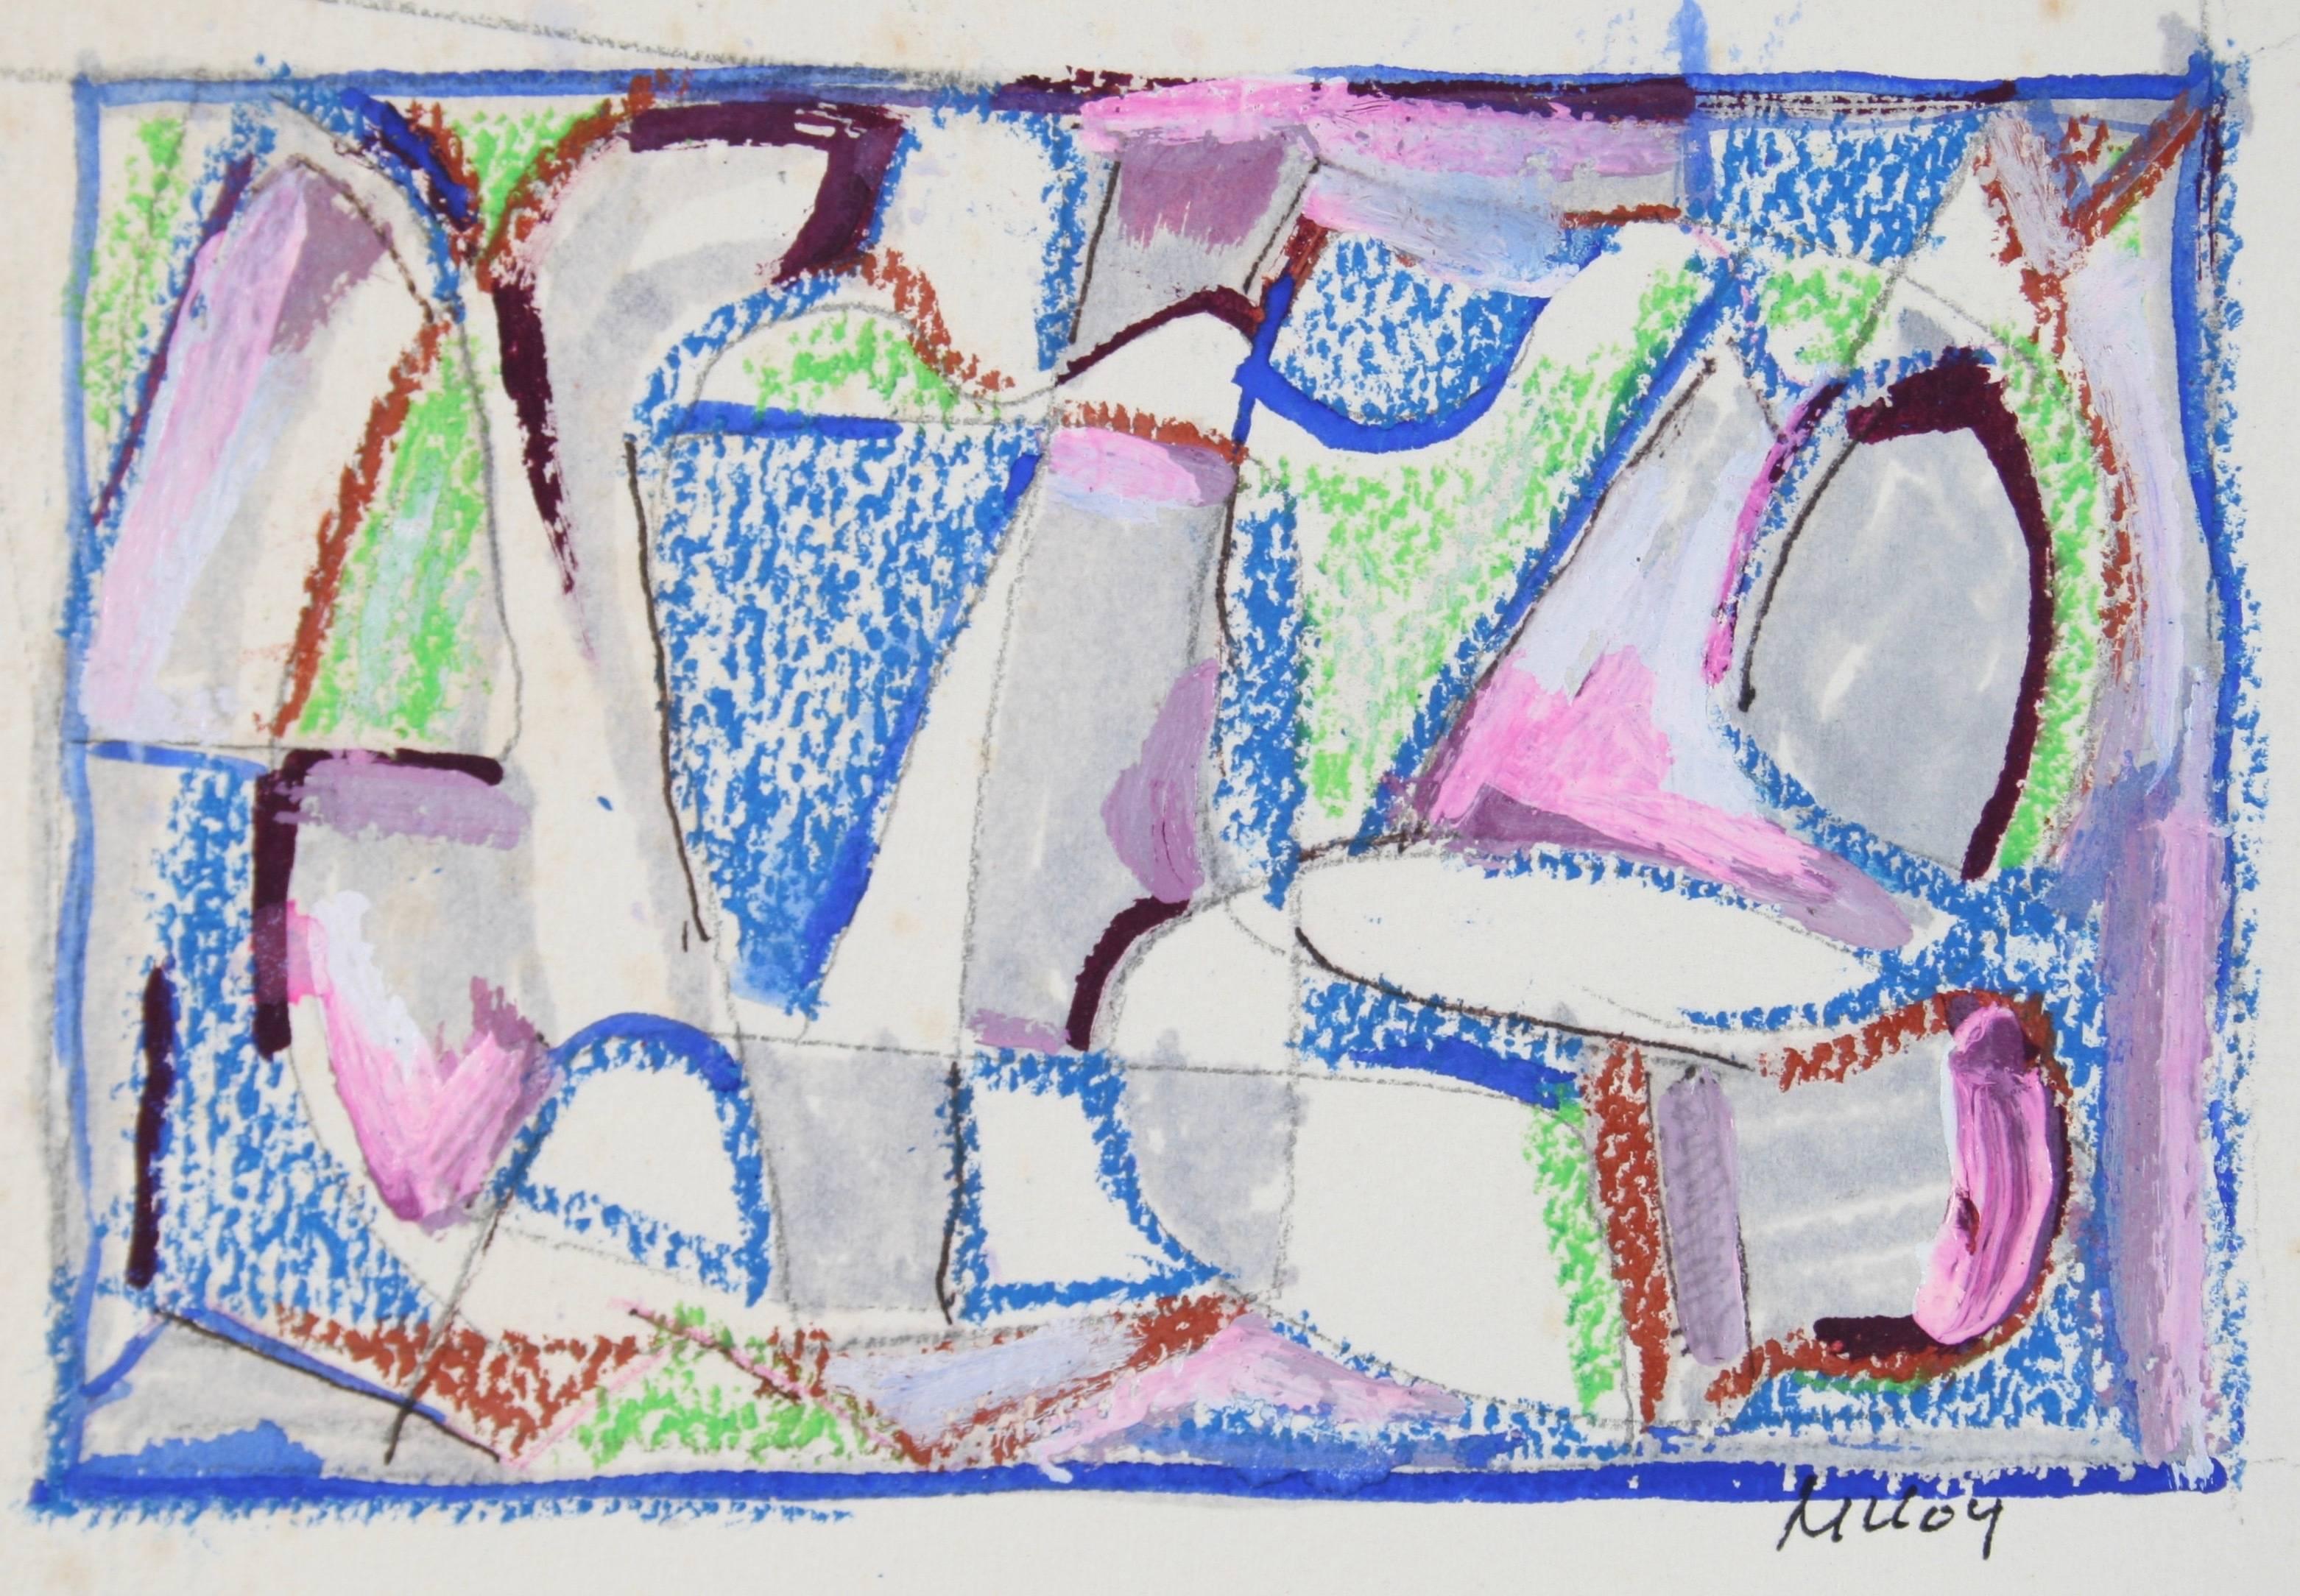 Paul McCoy Abstract Drawing - Bright Modernist Abstraction